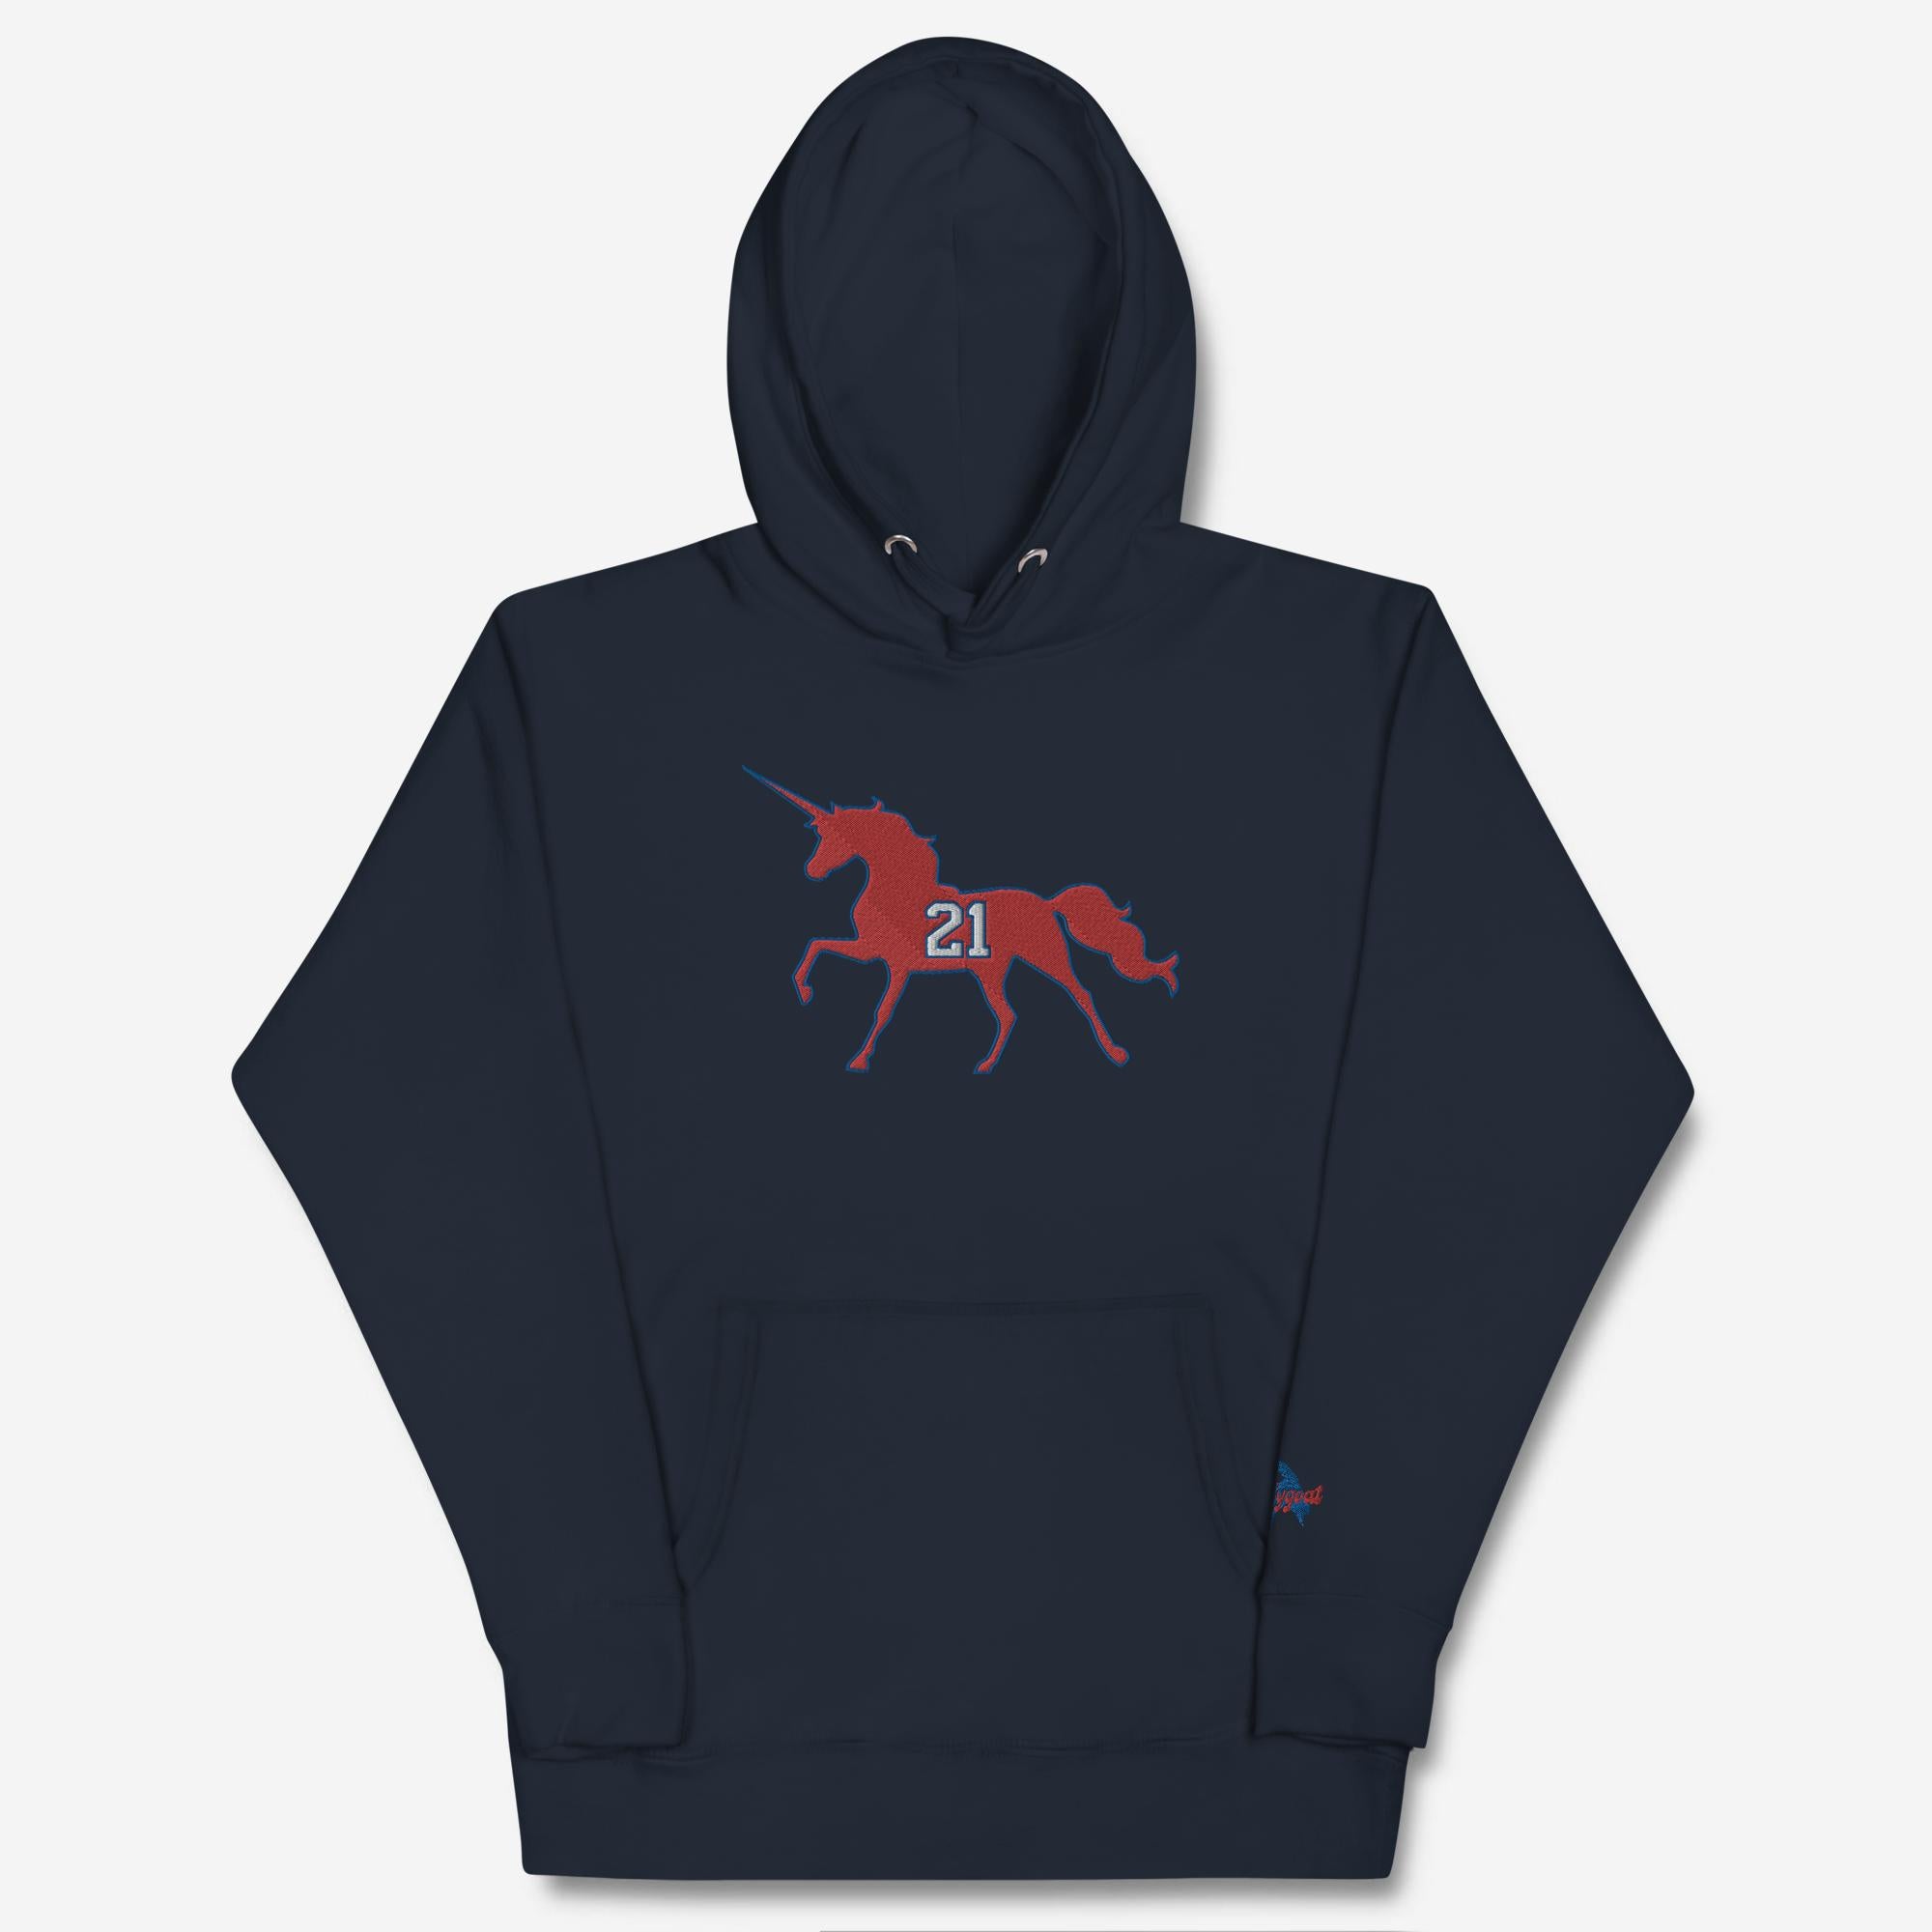 "Embiidicorns Are Real" Embroidered Hoodie